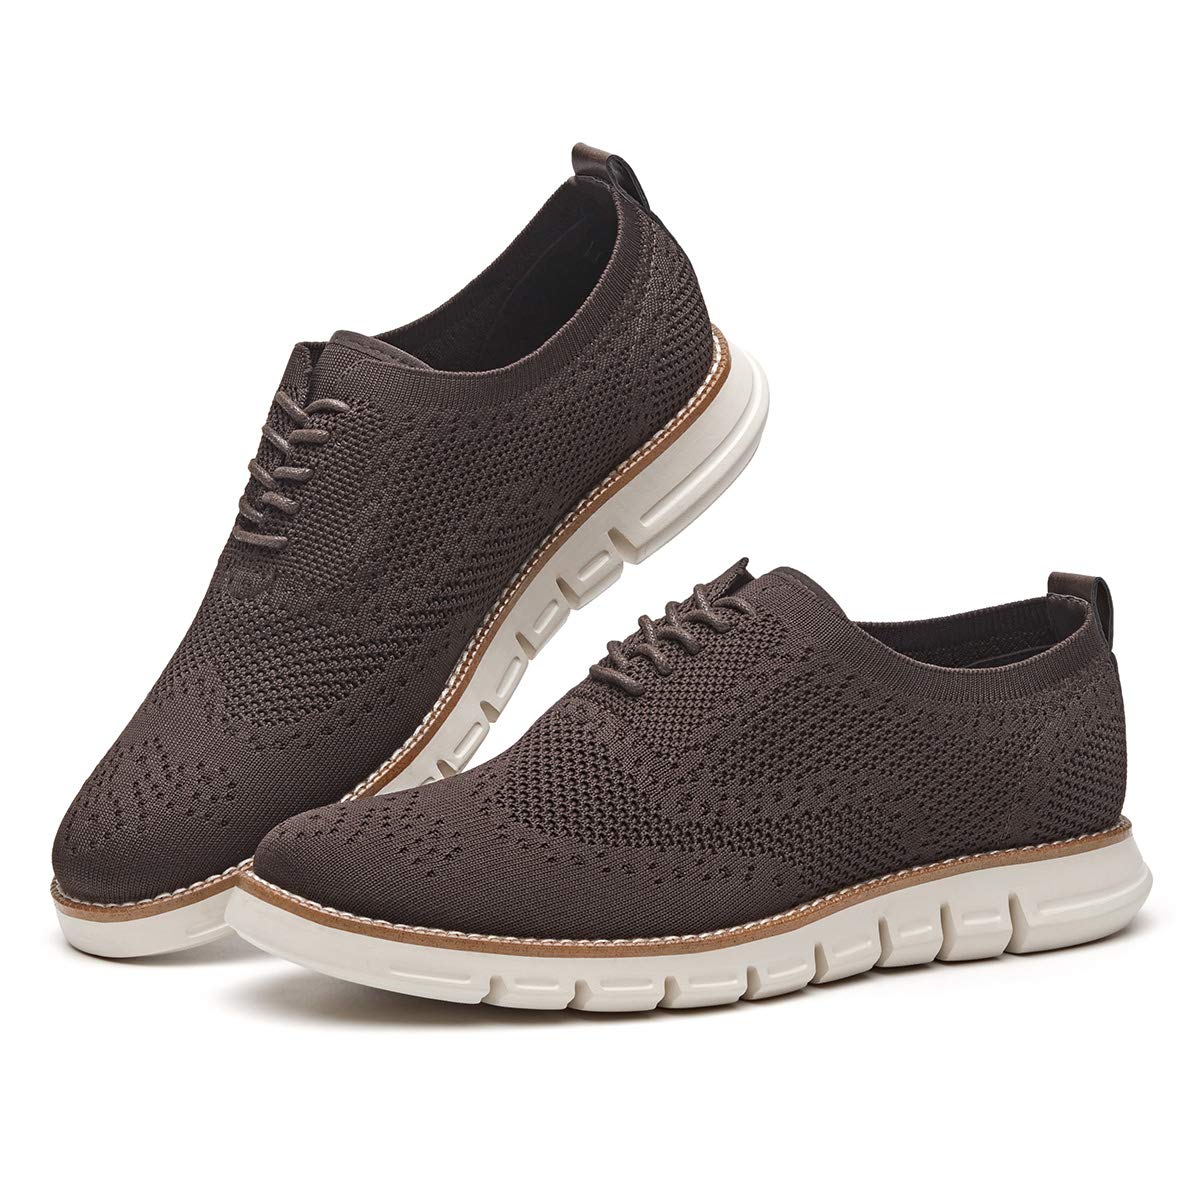 wingtip casual shoes